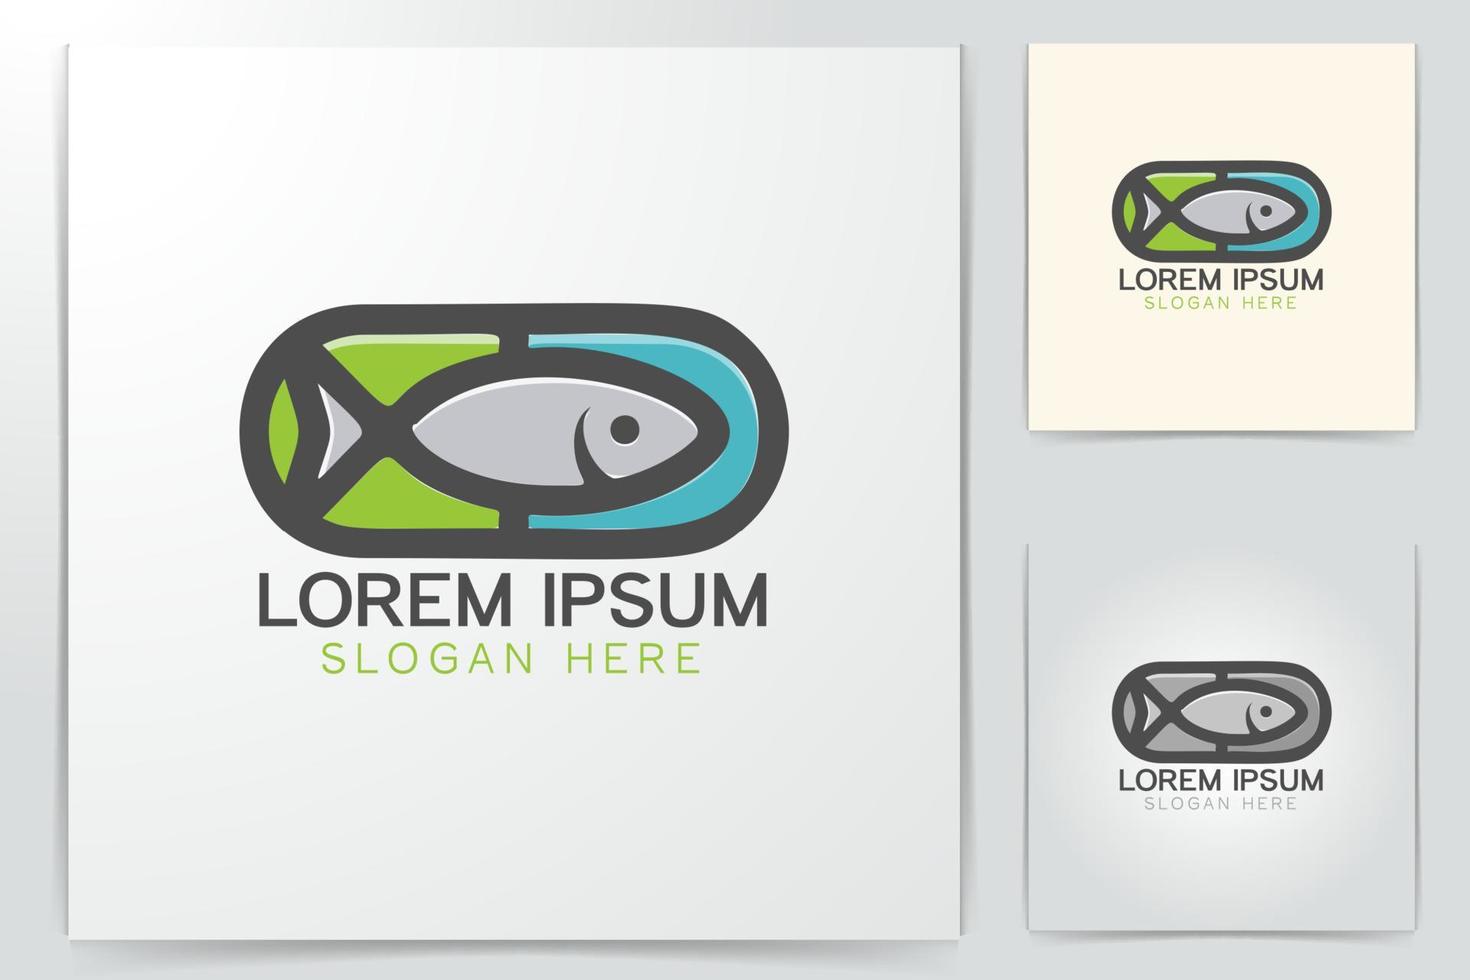 pill, fish, supplement logo Designs Inspiration Isolated on White Background vector